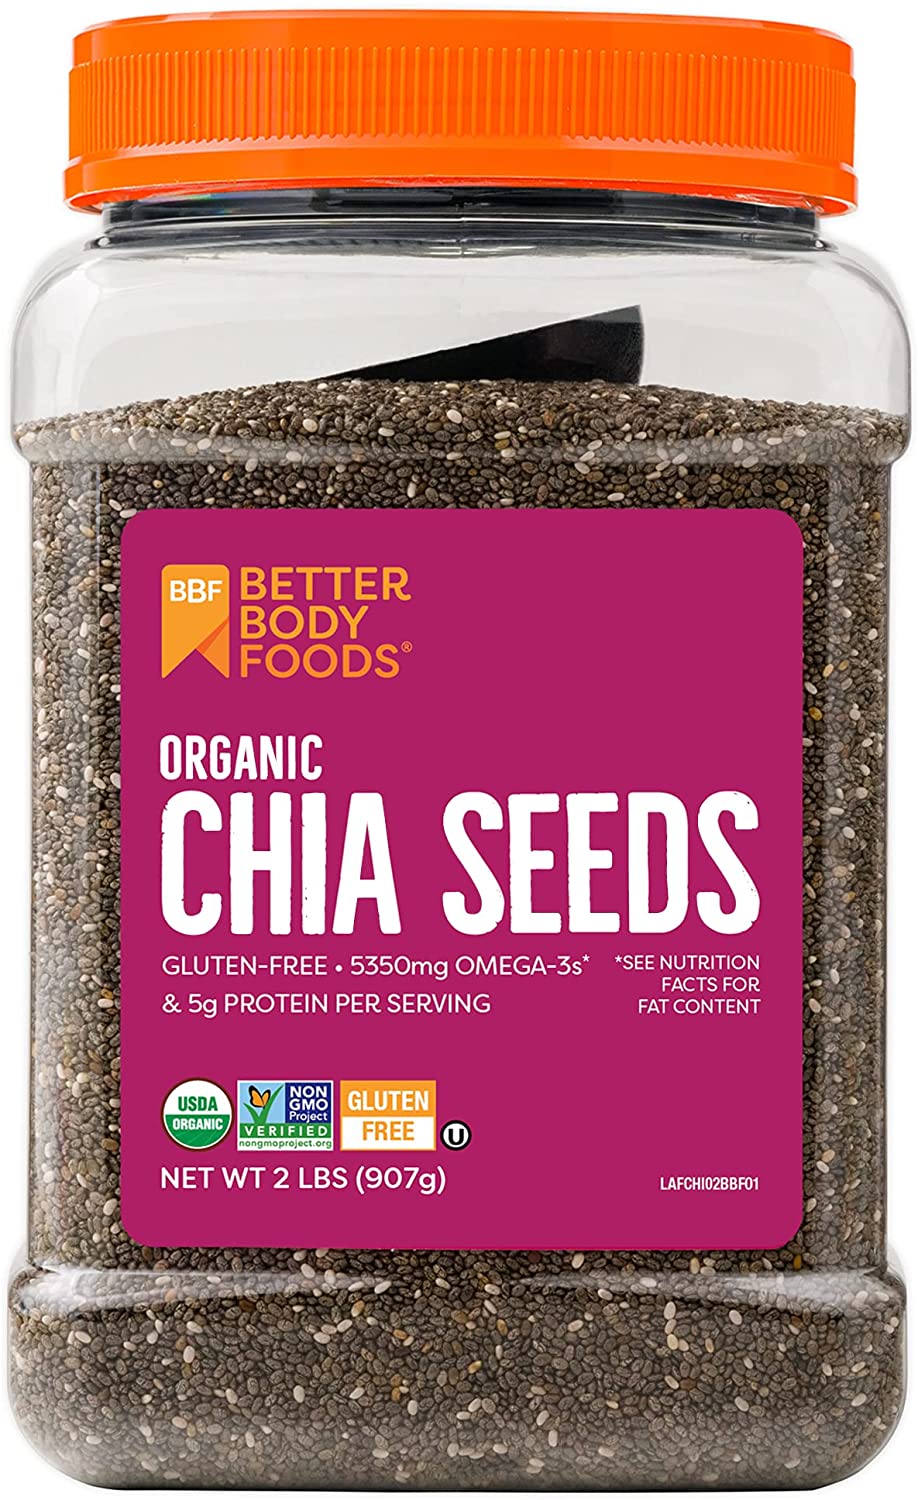 BetterBody Foods Organic Chia Seeds with Omega-3, Non-GMO